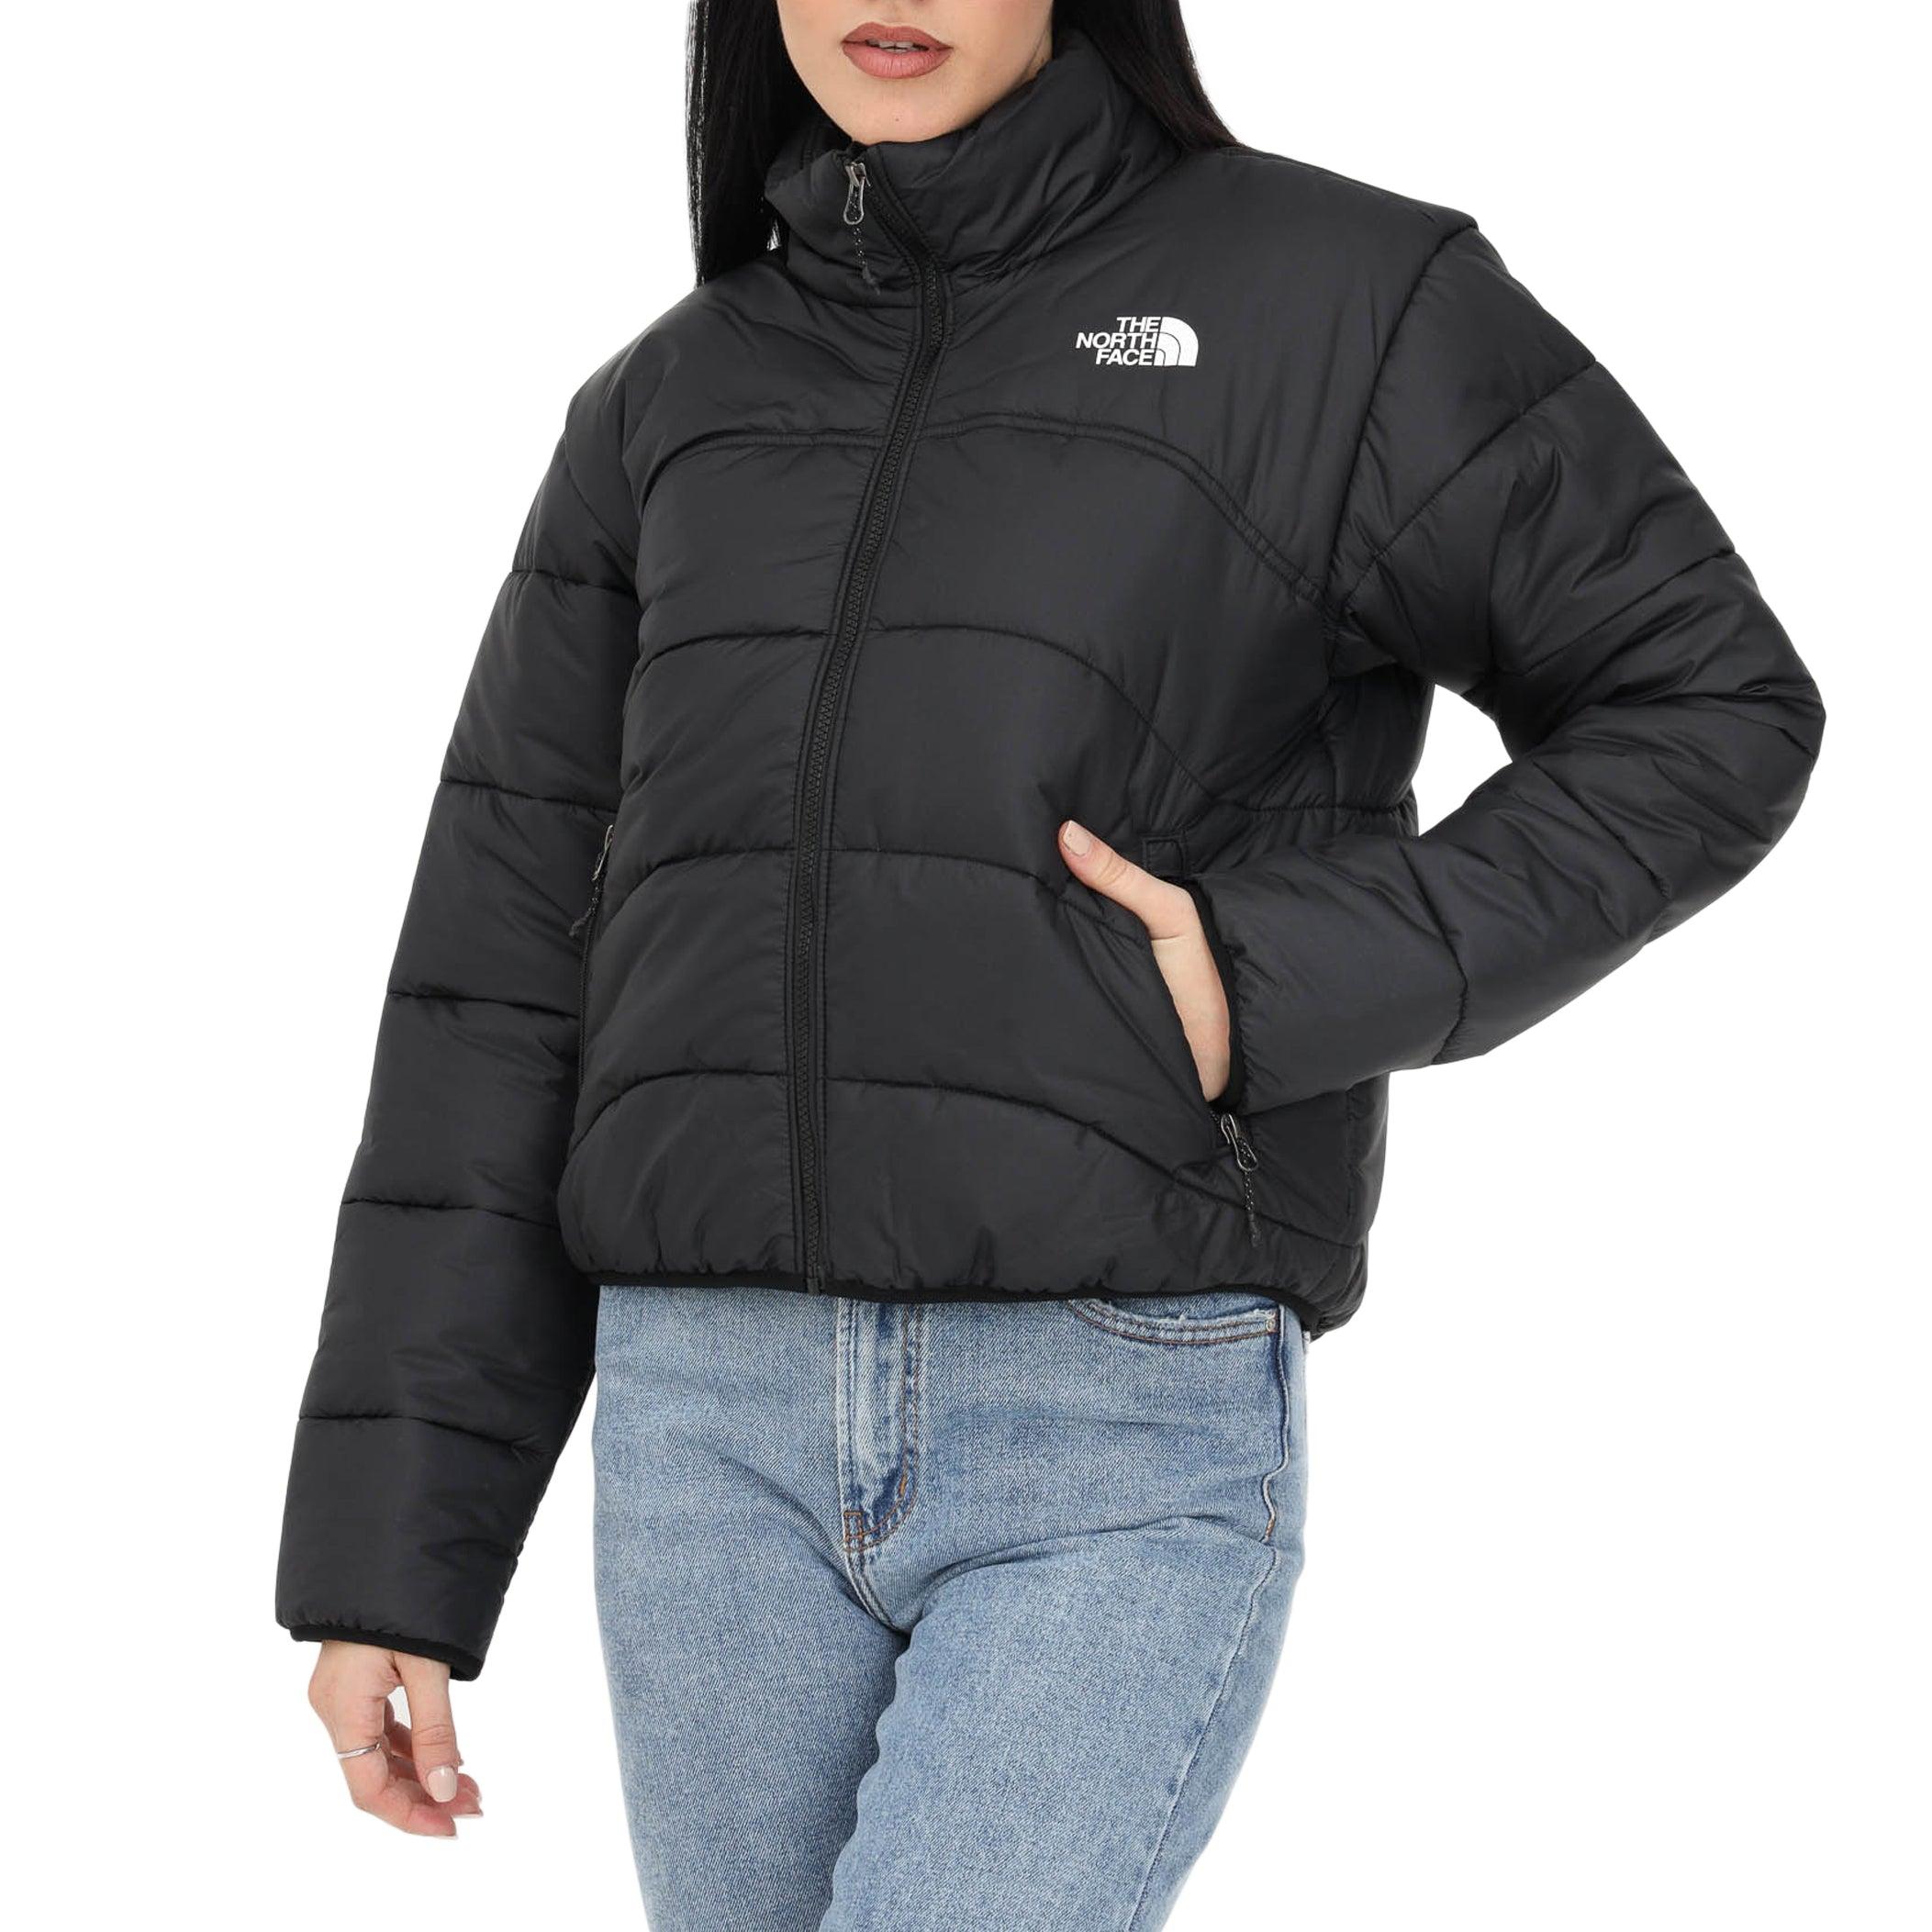 The North Face Jacket W Tnf 2000 Tnf Black | Lyst